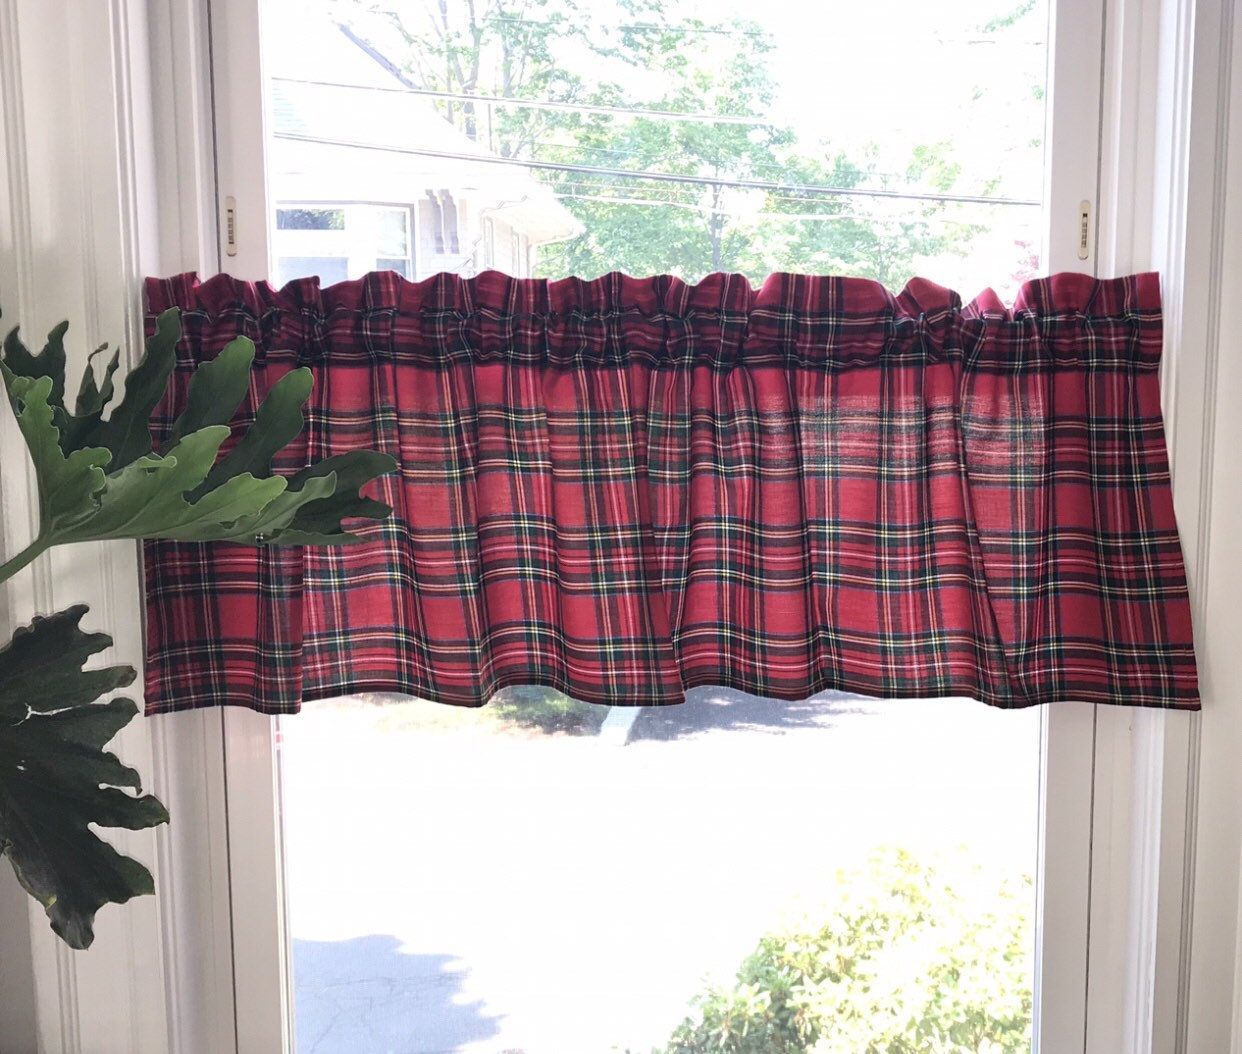 Christmas Royal Stewart Tartan Valance, Red Green Plaid With Lodge Plaid 3 Piece Kitchen Curtain Tier And Valance Sets (View 8 of 20)